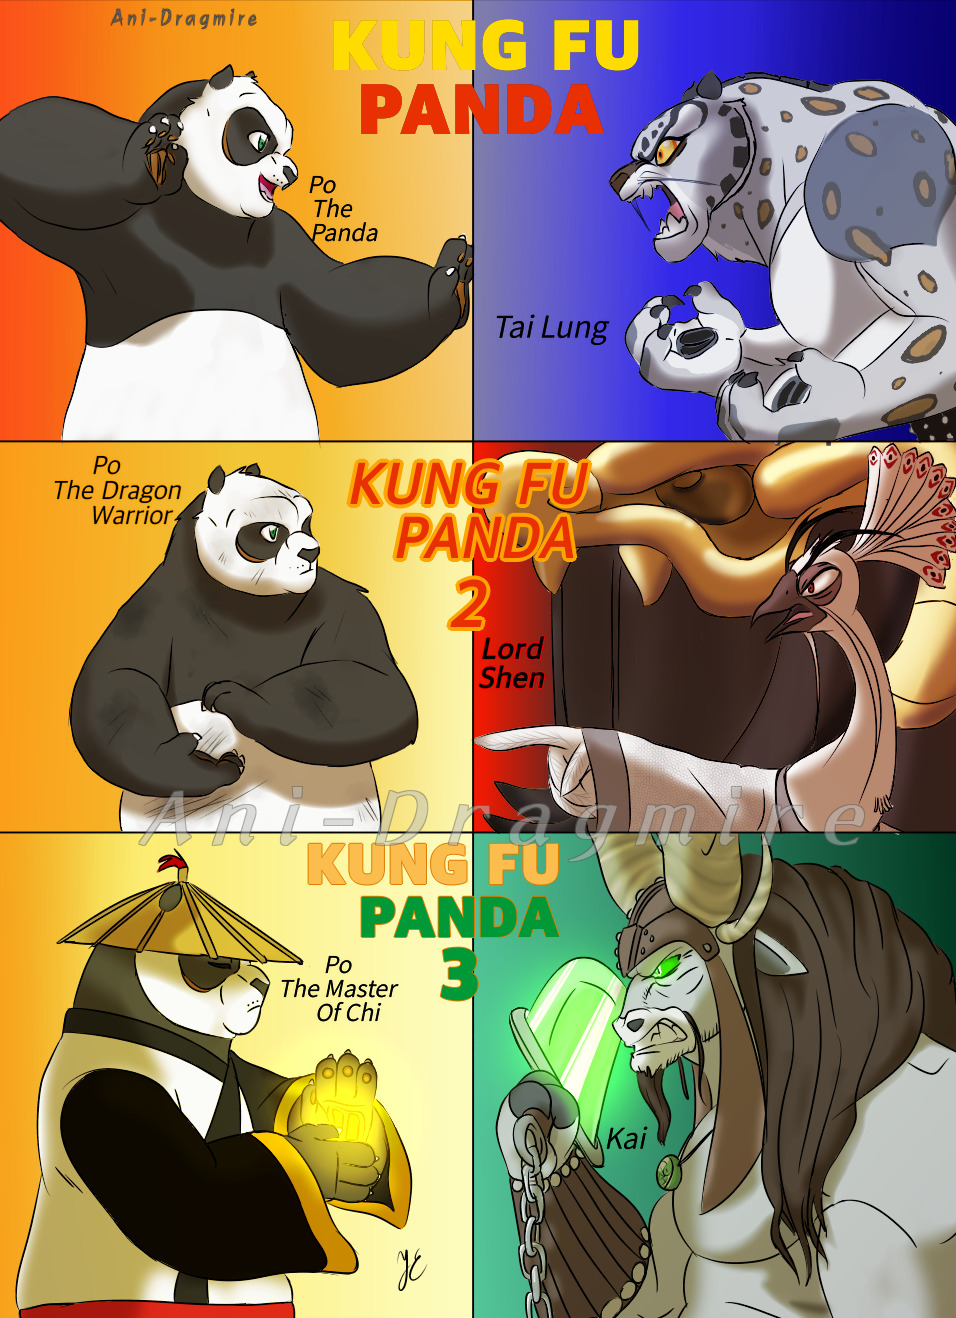 LORDS MOBILE WELCOMES DREAMWORKS ANIMATION'S KUNG FU PANDA WARRIORS